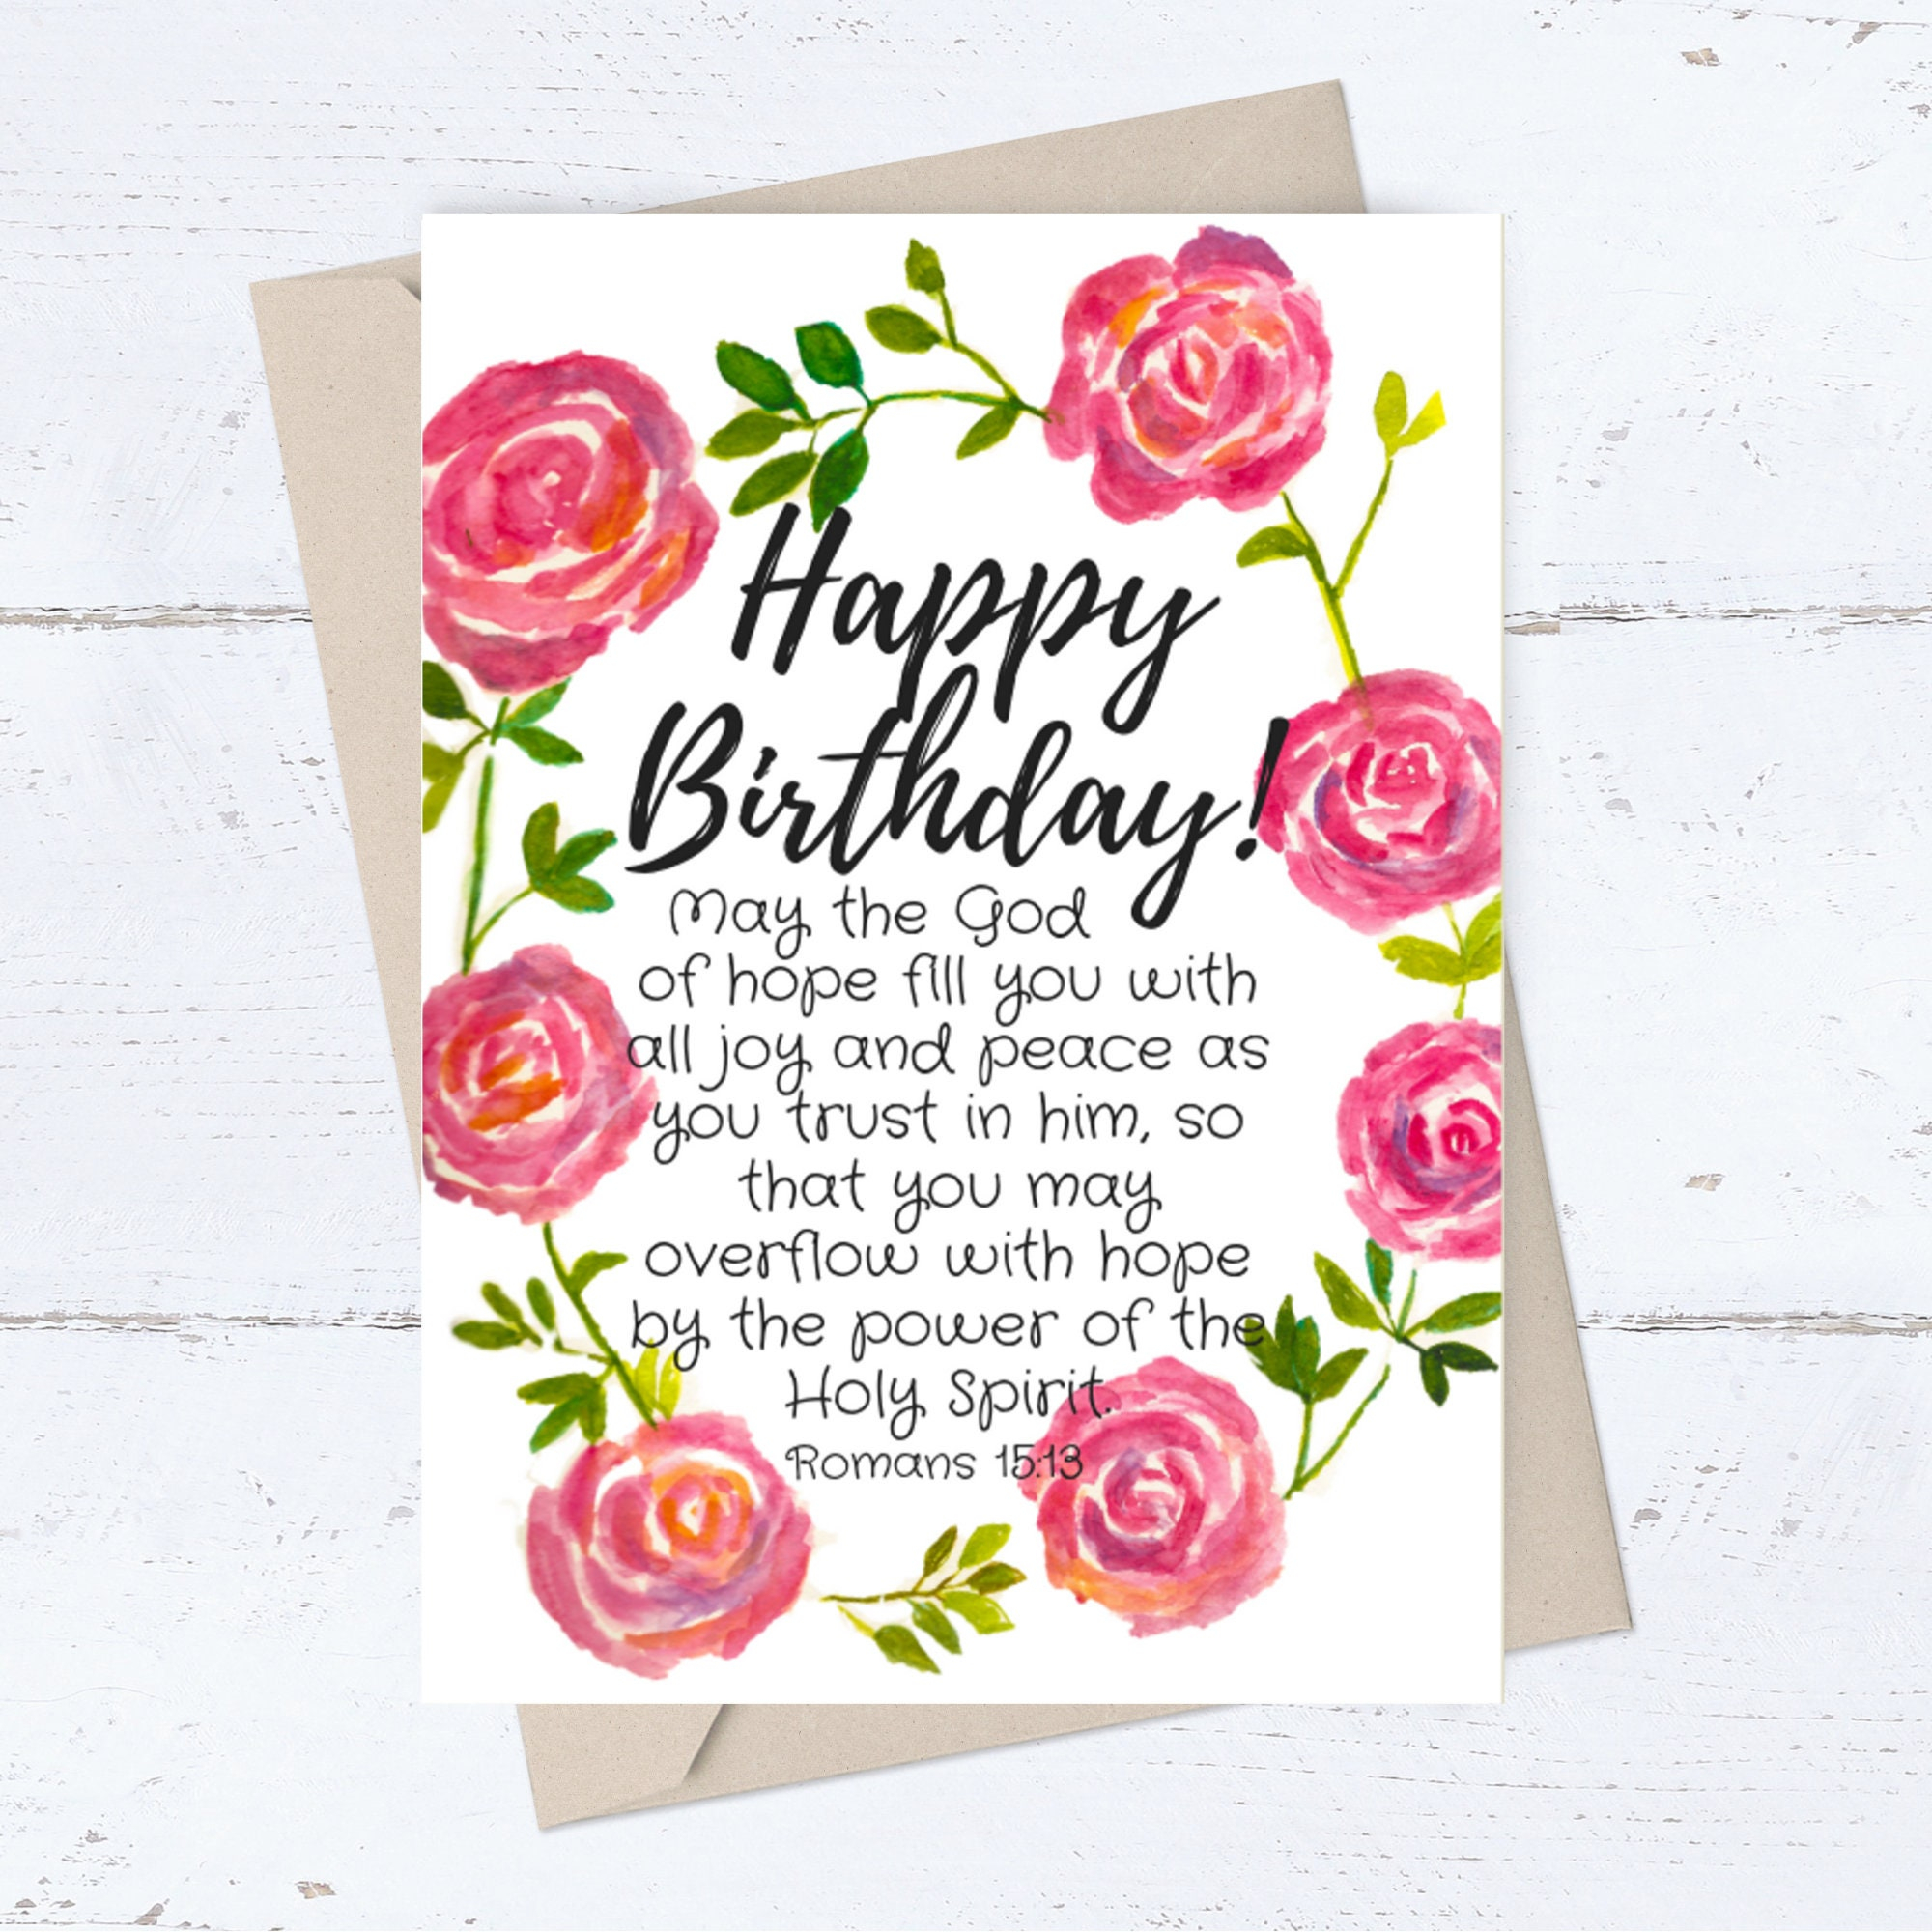 Christian Birthday Cards With The Religious Quotes - Candacefaber